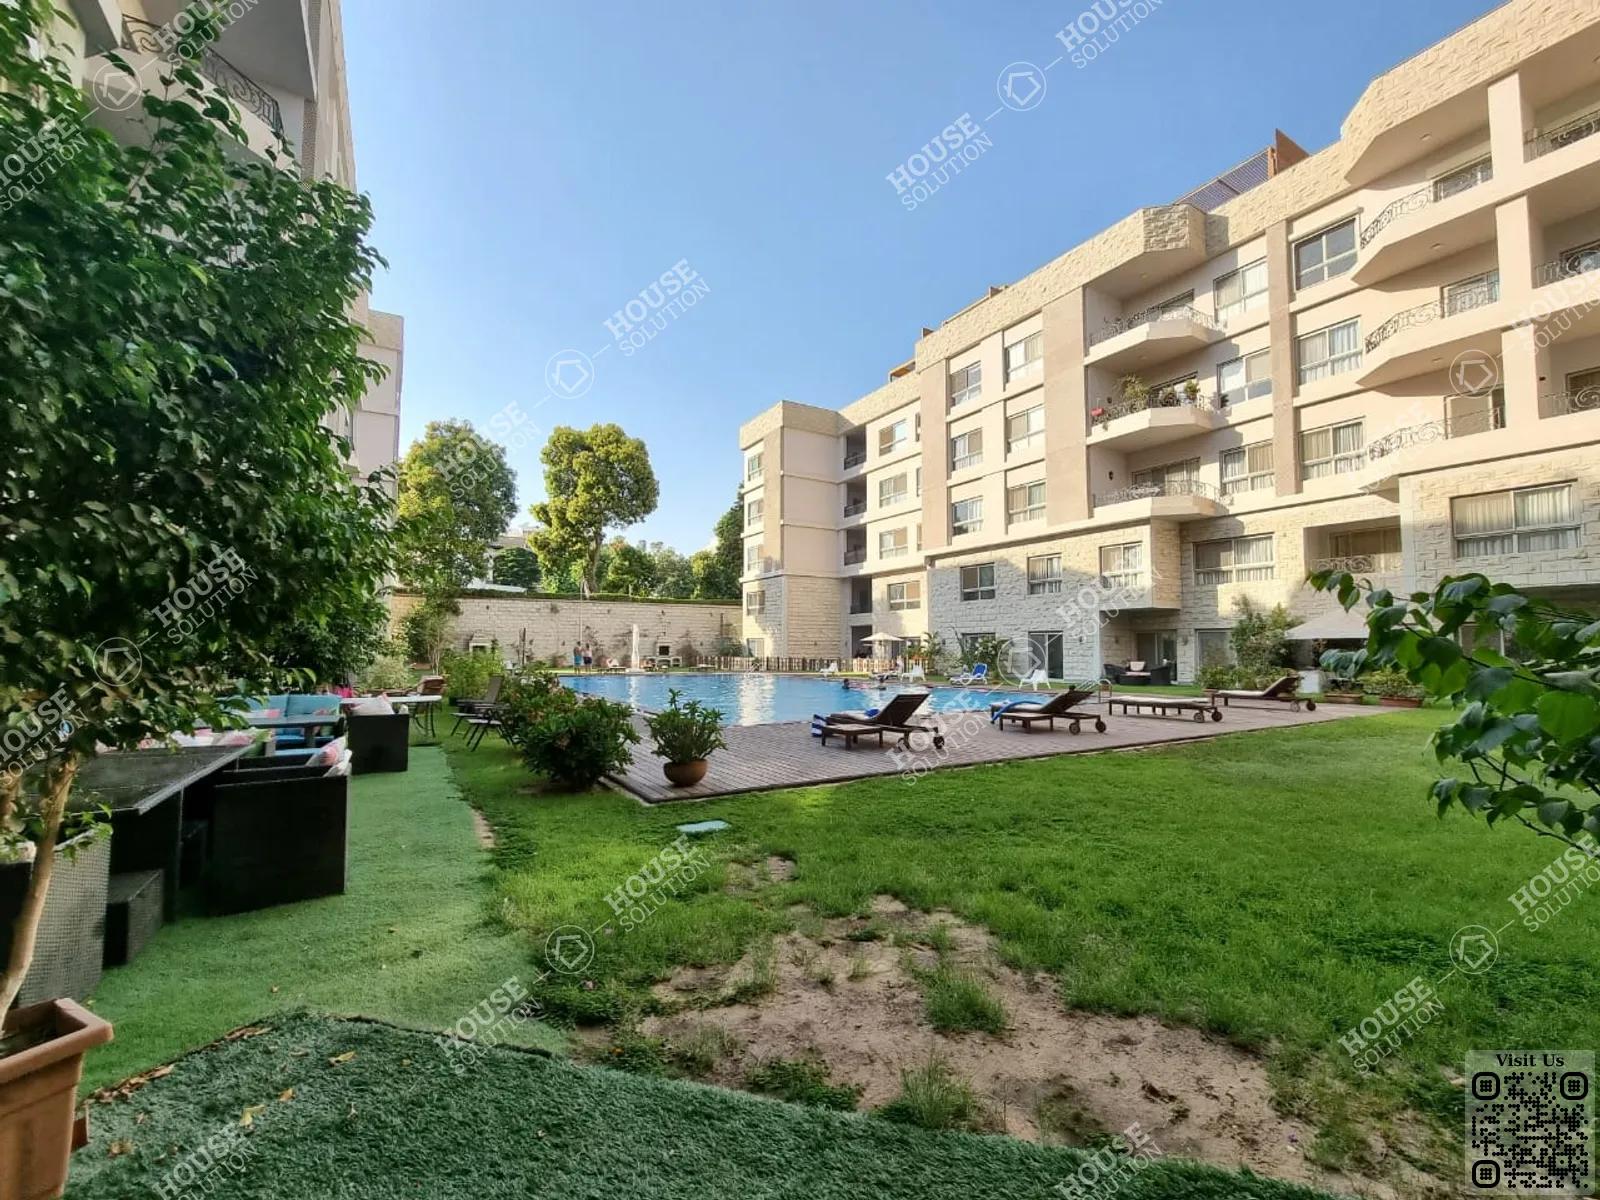 SHARED SWIMMING POOL  @ Ground Floors For Rent In Maadi Maadi Sarayat Area: 300 m² consists of 3 Bedrooms 4 Bathrooms Modern furnished 5 stars #5087-1